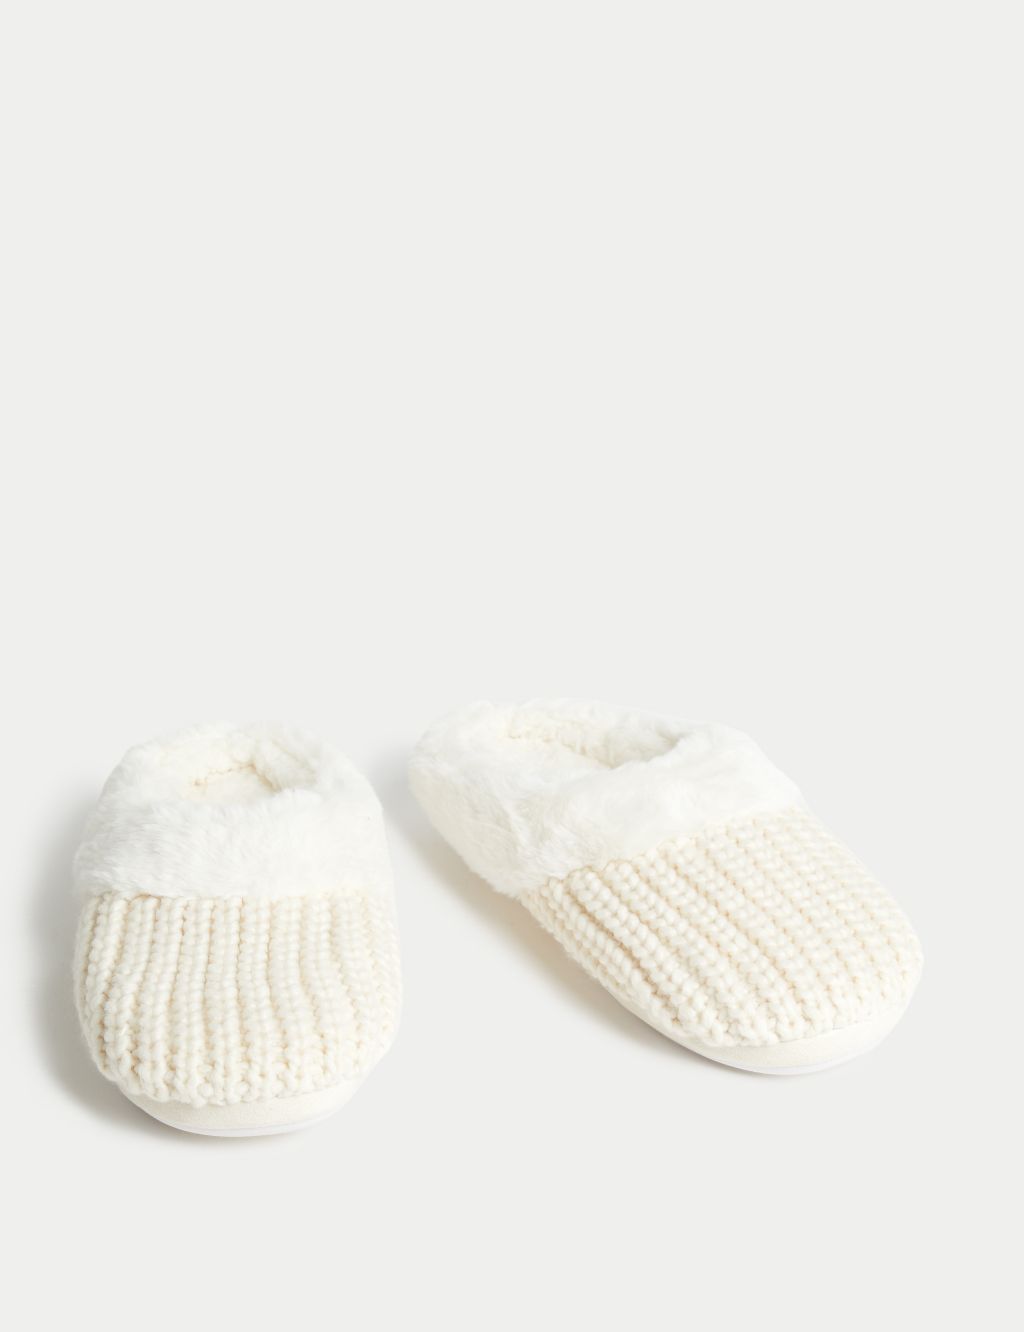 Kids' Knitted Slippers (13 Small - 6 Large) image 2